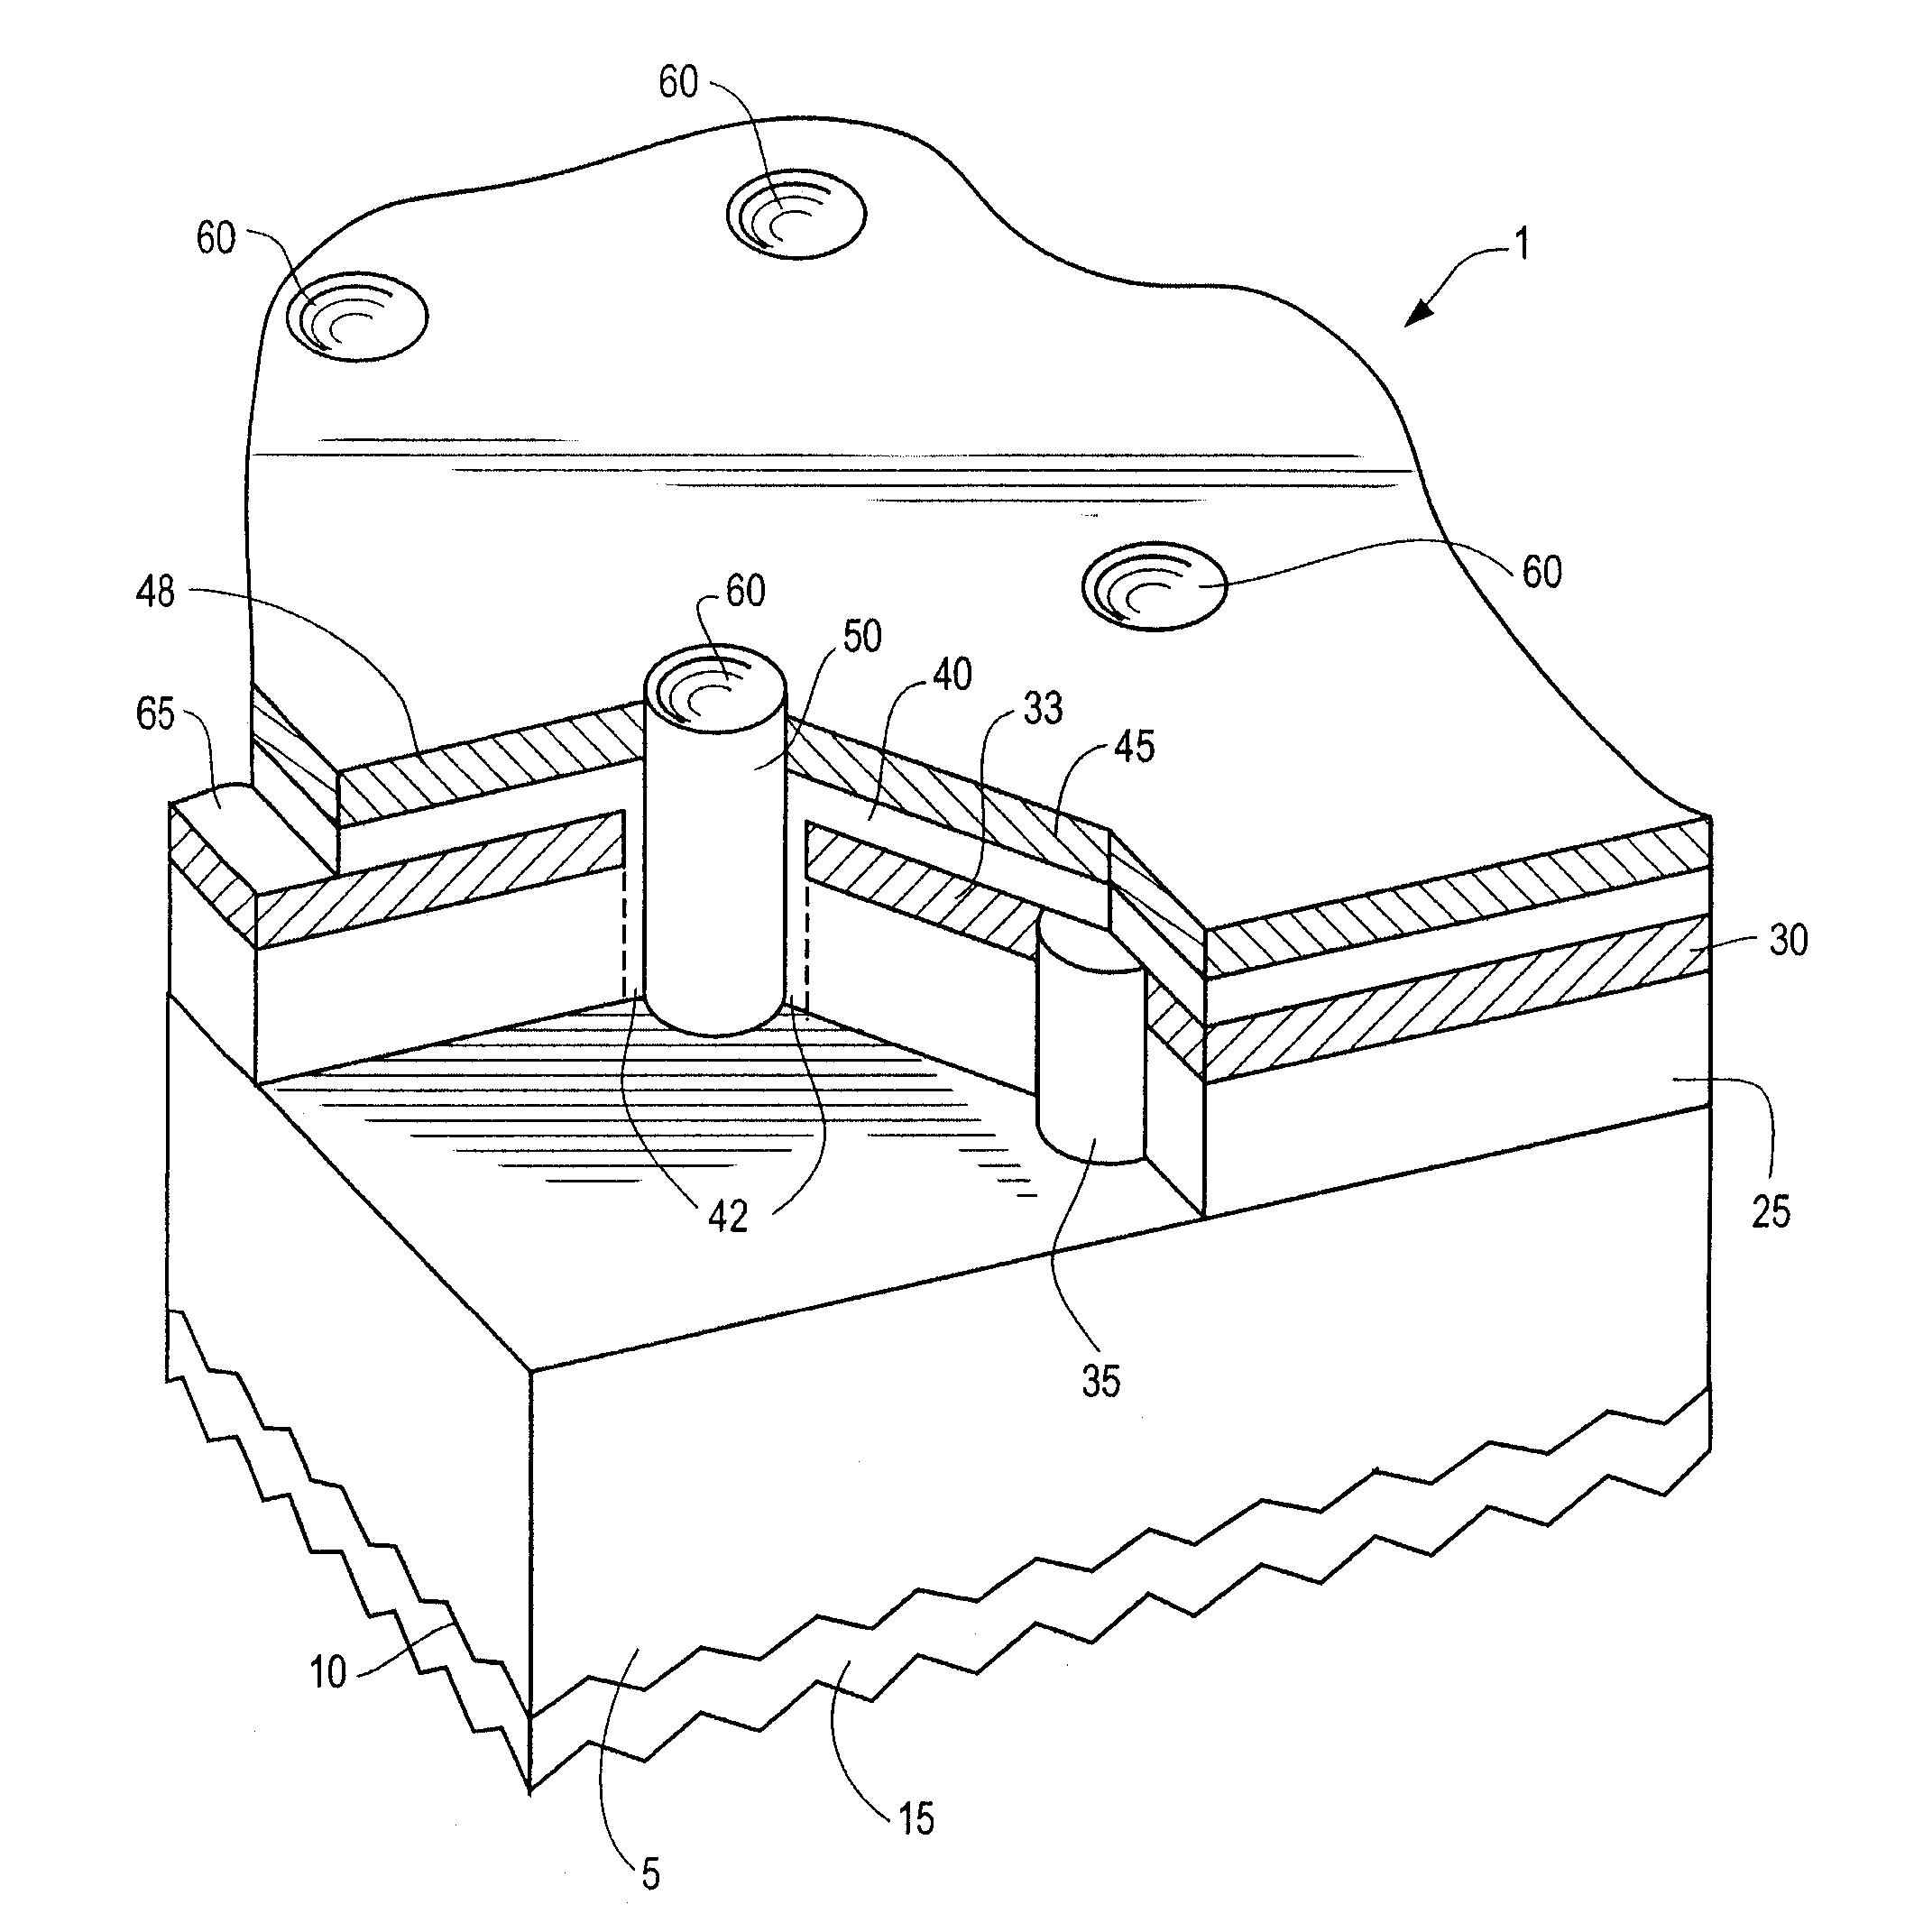 Back-Contact Photovoltaic Cells